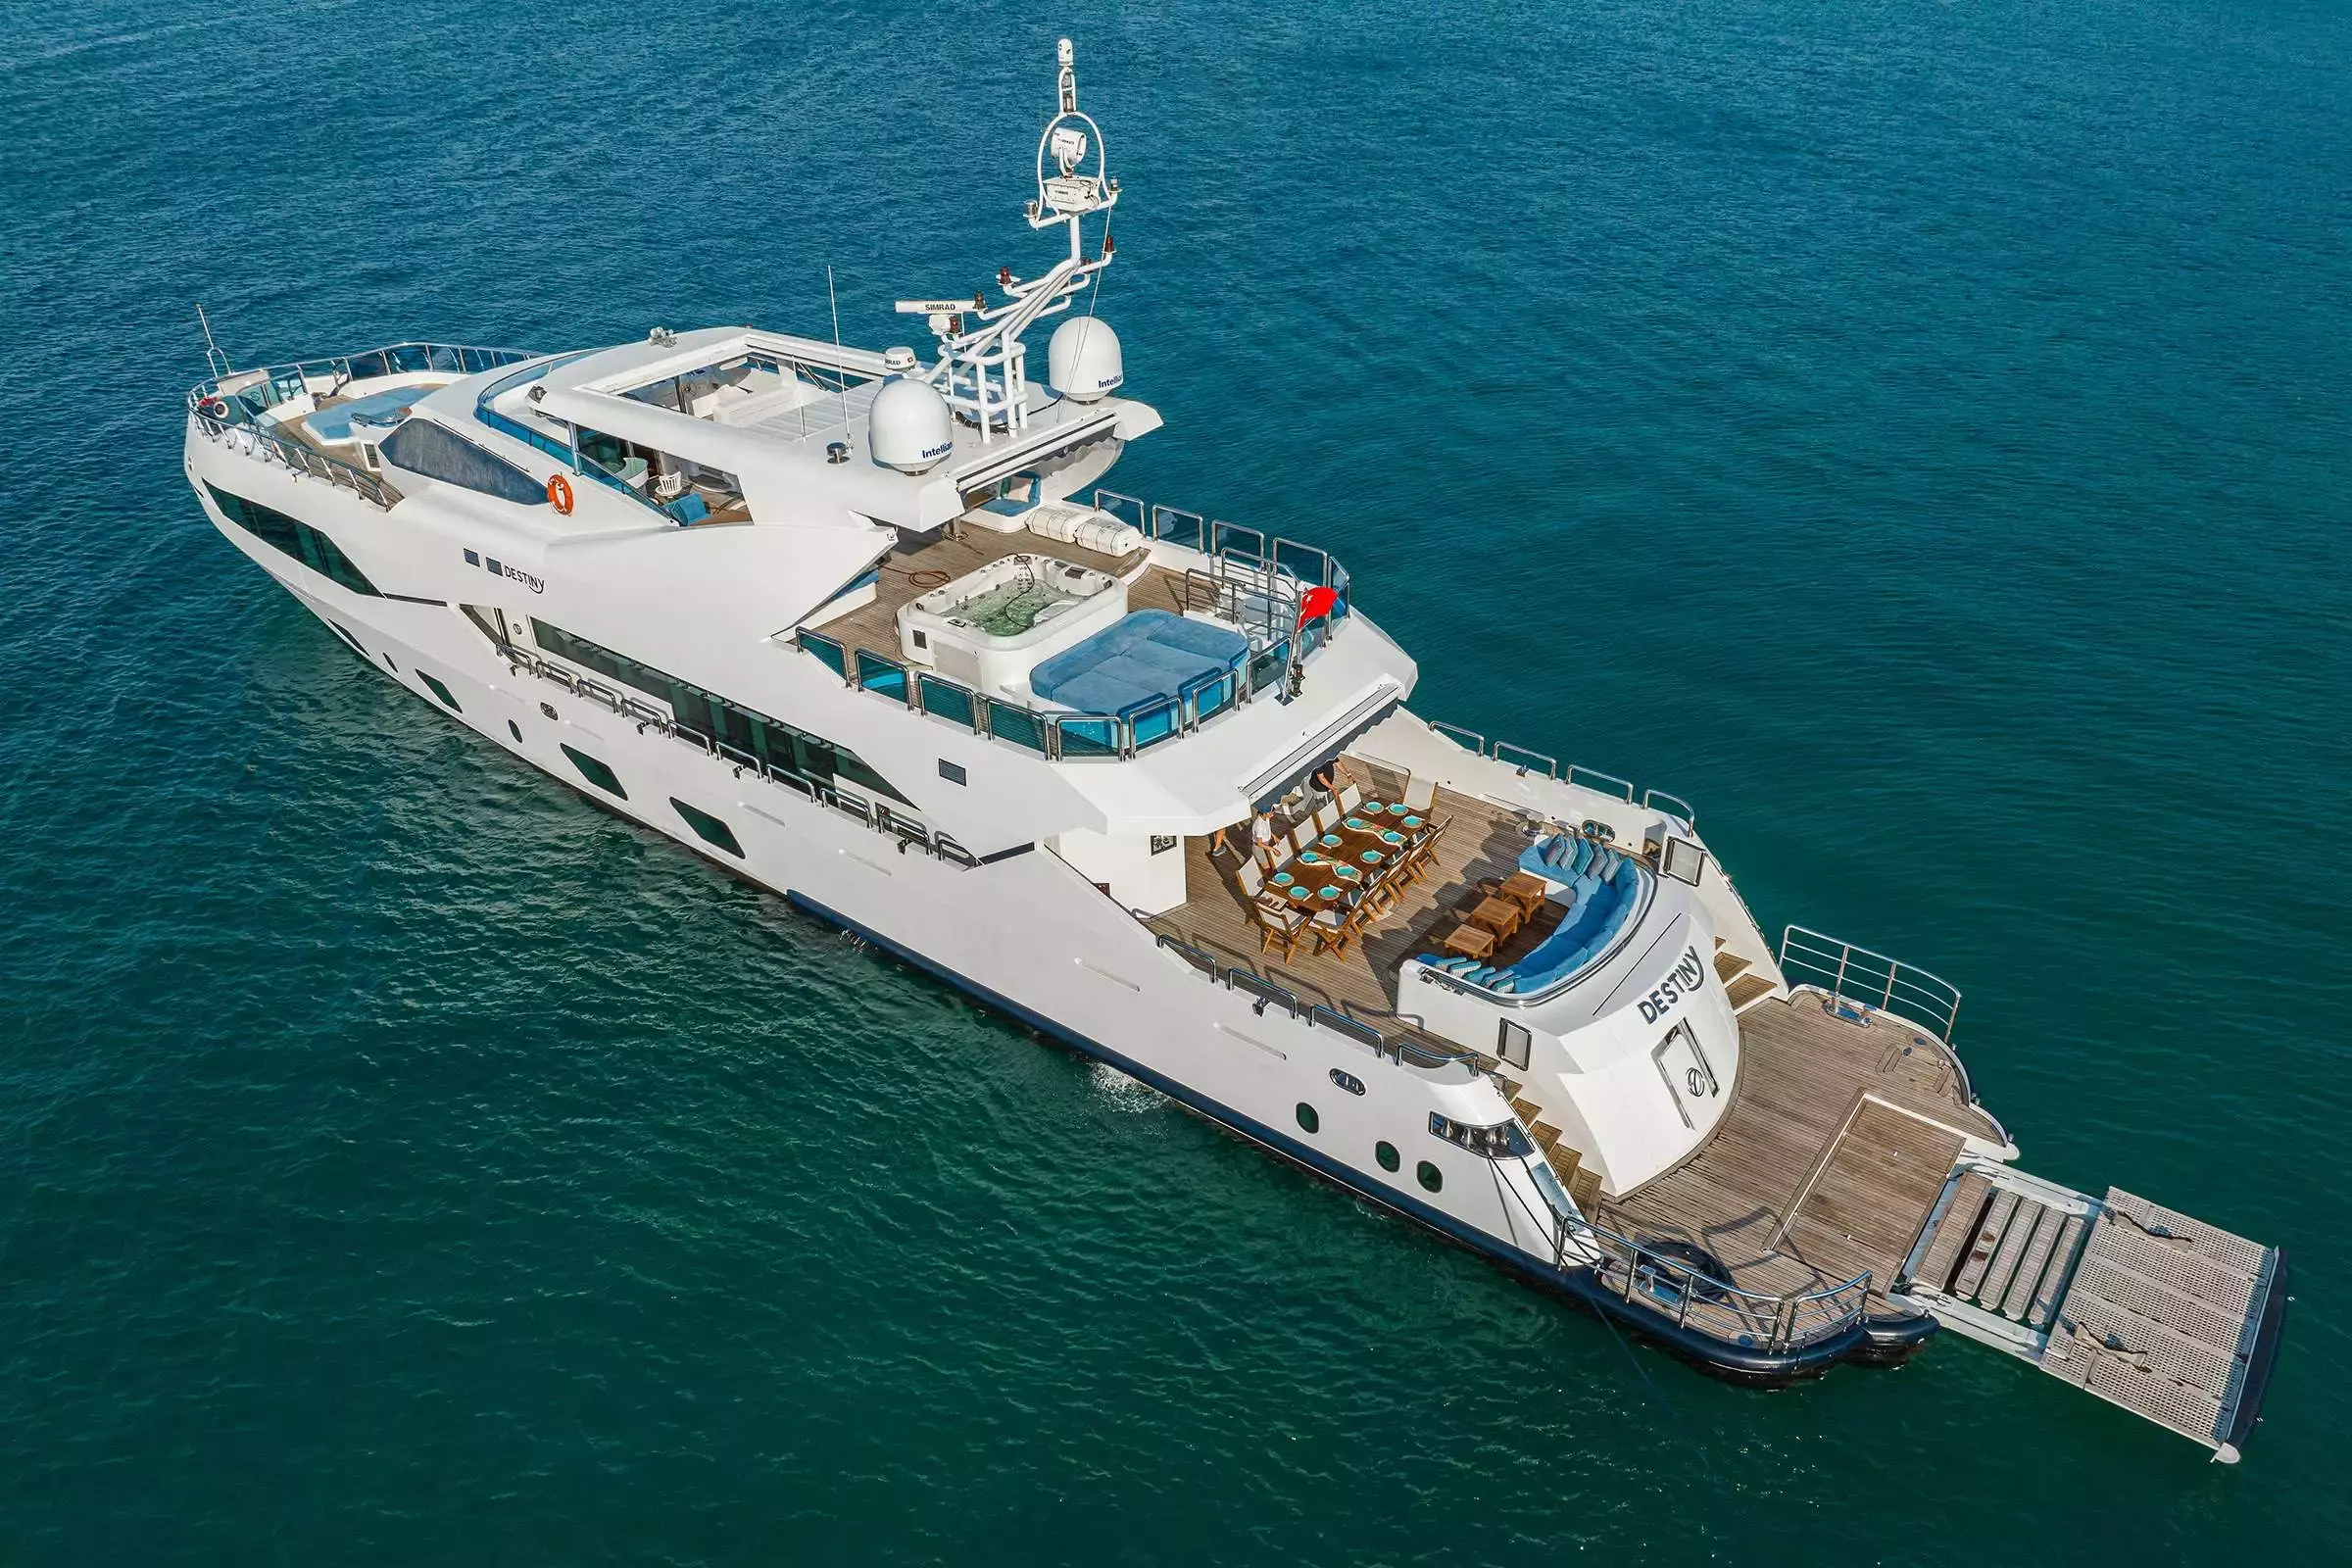 Destiny by Miss Tor Yacht - Special Offer for a private Superyacht Charter in Corfu with a crew